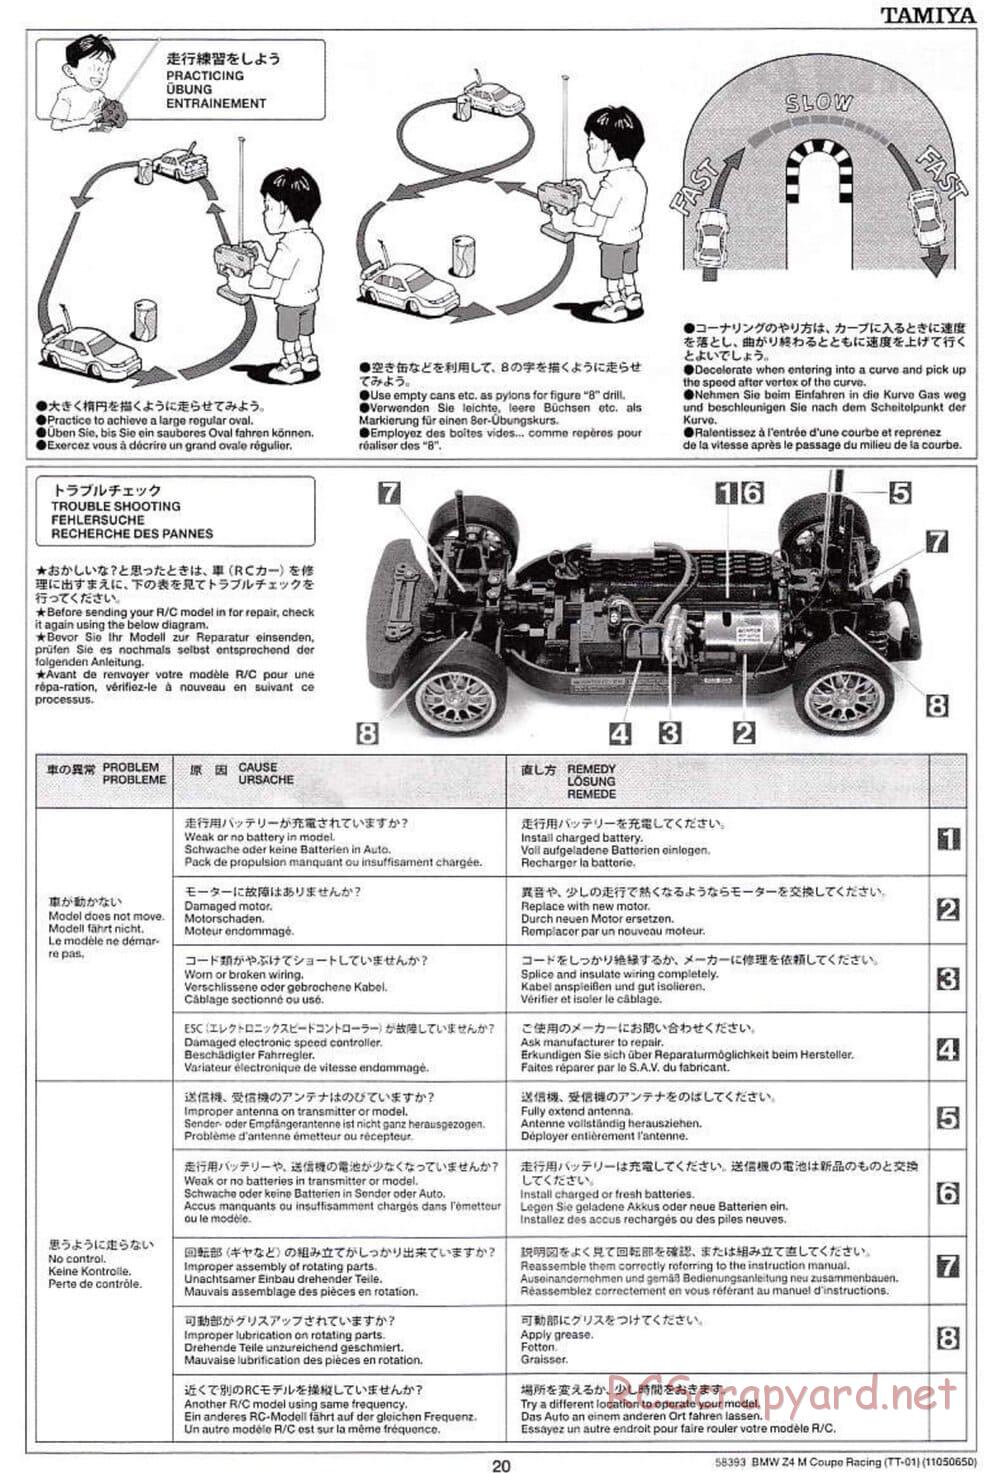 Tamiya - BMW Z4 M Coupe Racing - TT-01 Chassis - Manual - Page 20